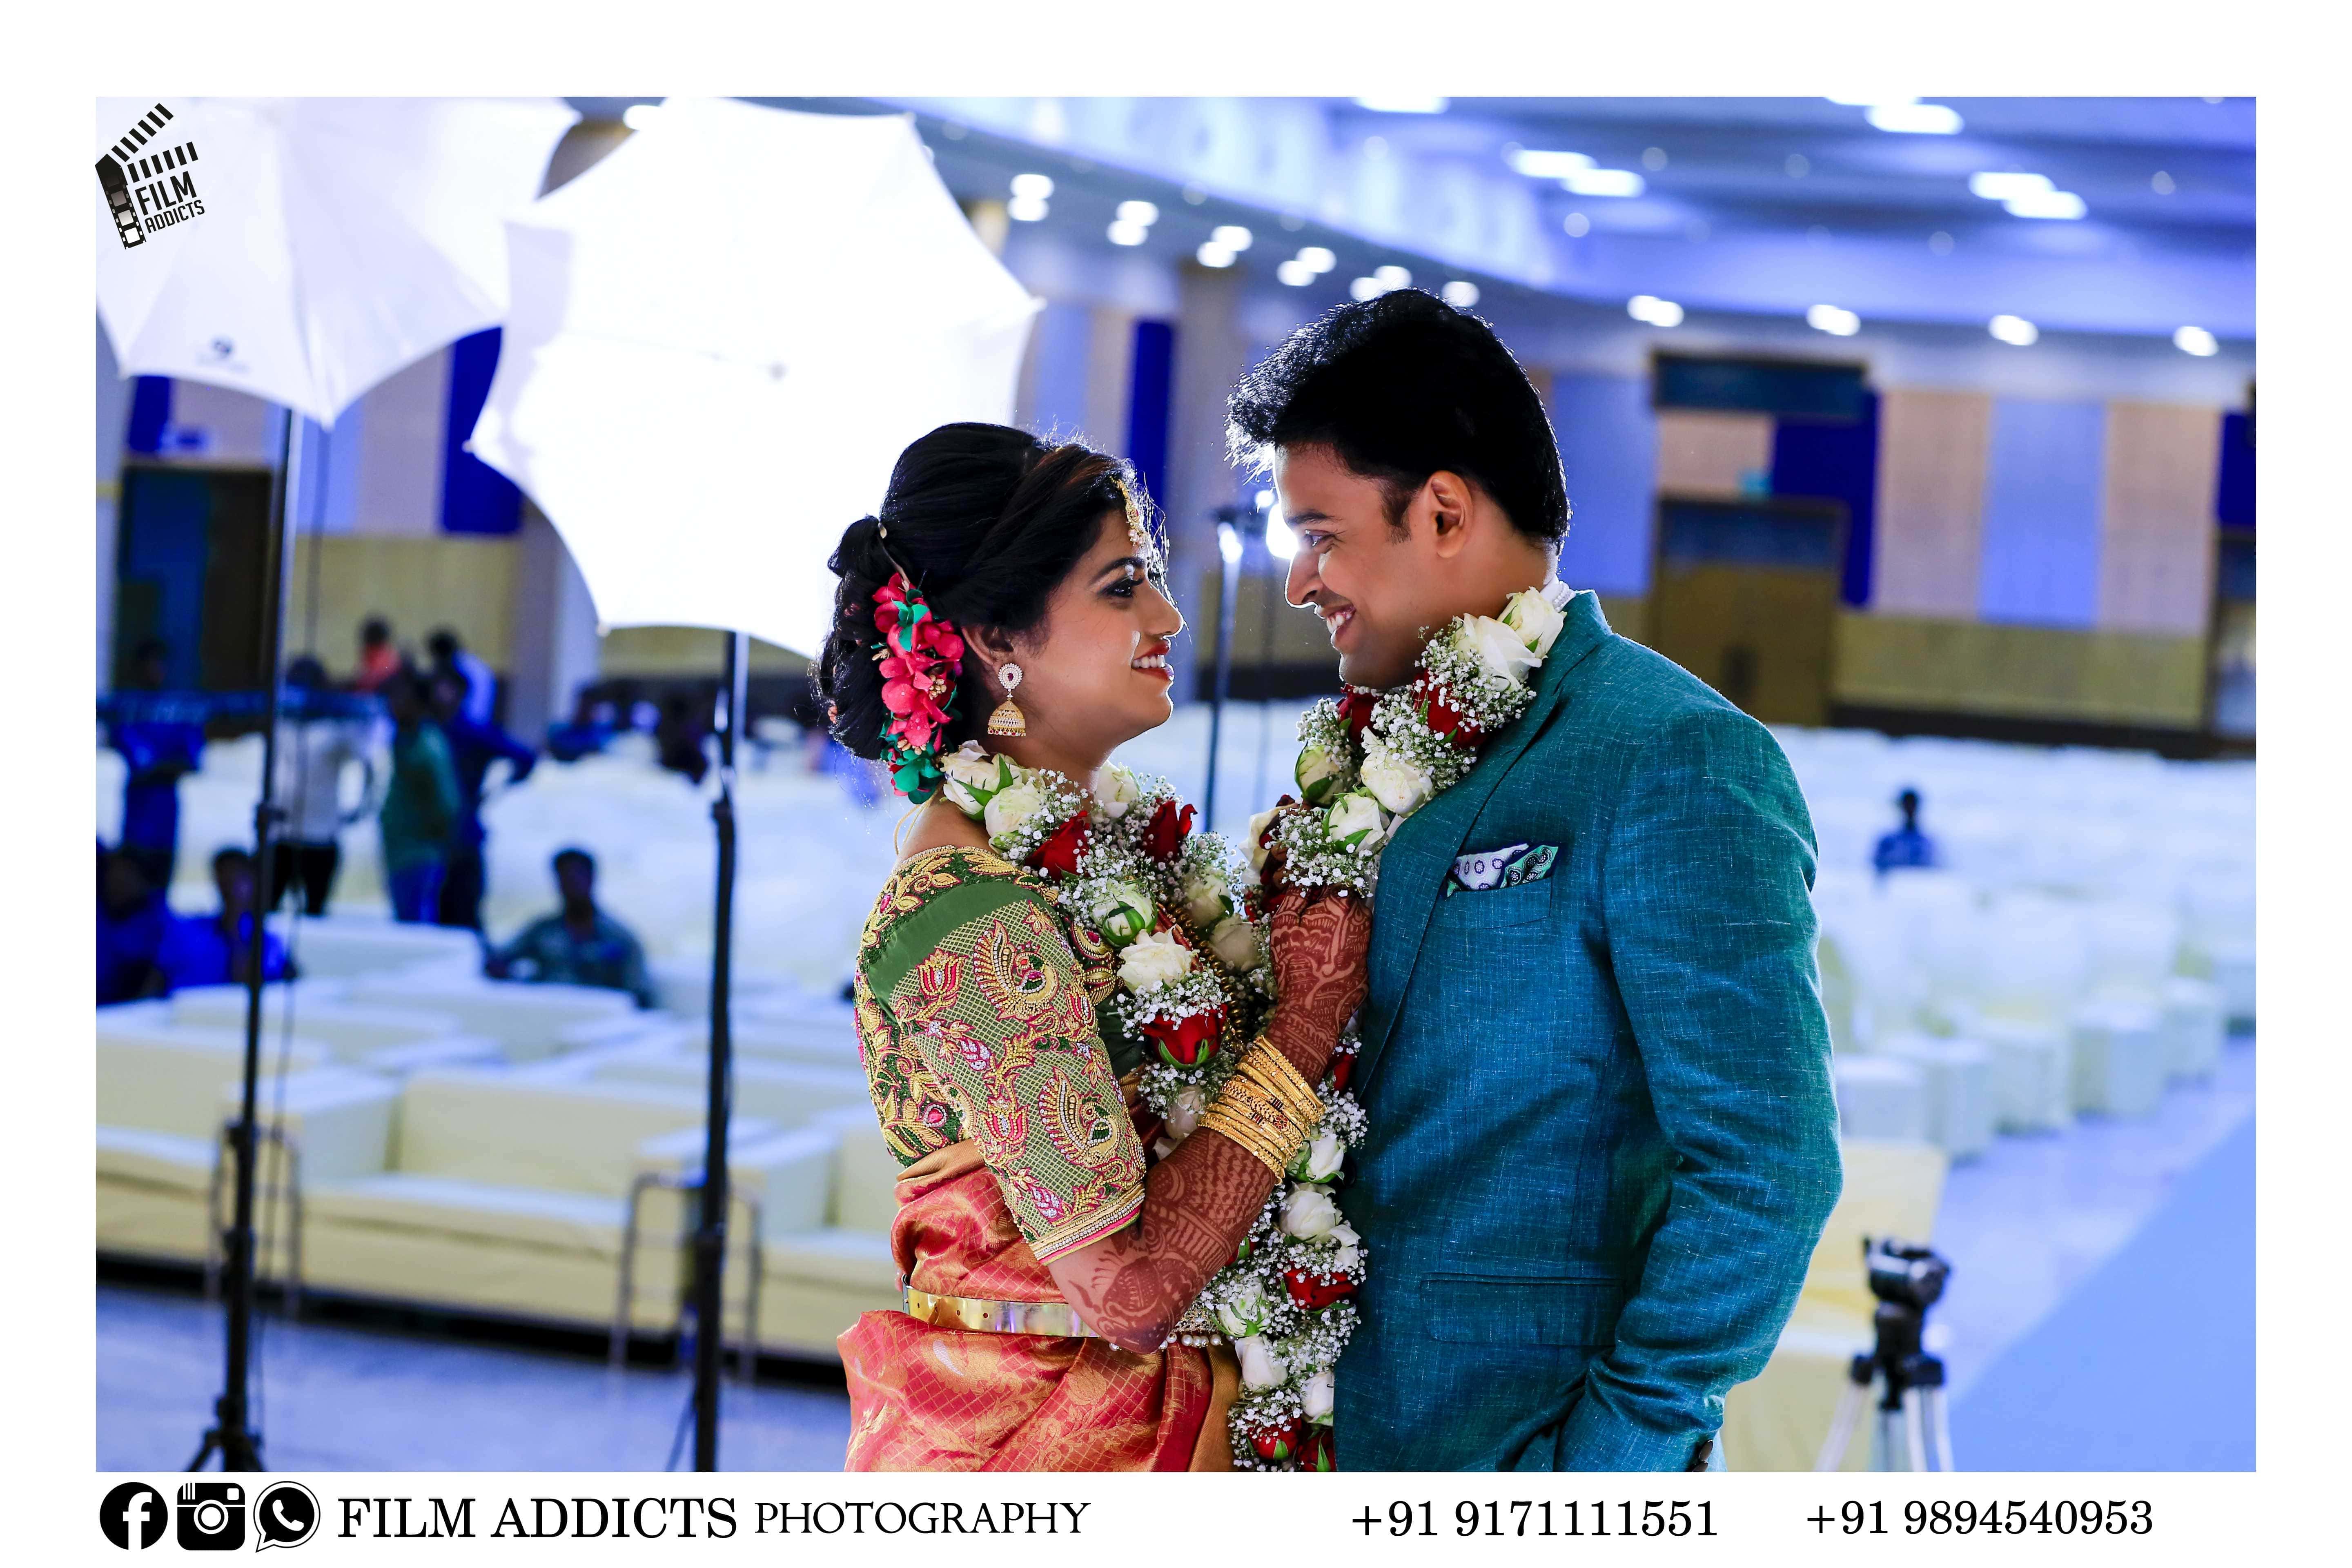 best-candid-photographers-in-theni,Candid-photography-in-theni,best-wedding -photography-in-theni,Best-candid-photography-inb-theni,    Best-candid-photographer,candid-photographer-in-theni,drone-photographer-in-theni,helicam-photographer-in-theni, 
    candid-wedding-photographers-in-theni,photographers-in-theni,professional-wedding-photographers-in-theni,
    top-wedding-filmmakers-in-theni,wedding-cinematographers-in-theni,wedding-cinimatography-in-theni,wedding-photographers-in-theni,
    wedding-teaser-in-theni, asian-wedding-photography-in-theni, best-candid-photographers-in-theni, best-candid-videographers-in-theni,  
    best-photographers-in-theni best-wedding-photographers-in-theni, 
    best-nadar-wedding-photography-in-theni candid-photographers-in-theni destination-wedding-photographers-in-theni,
    fashion-photographers-in-theni, theni-famous-stage-decorations